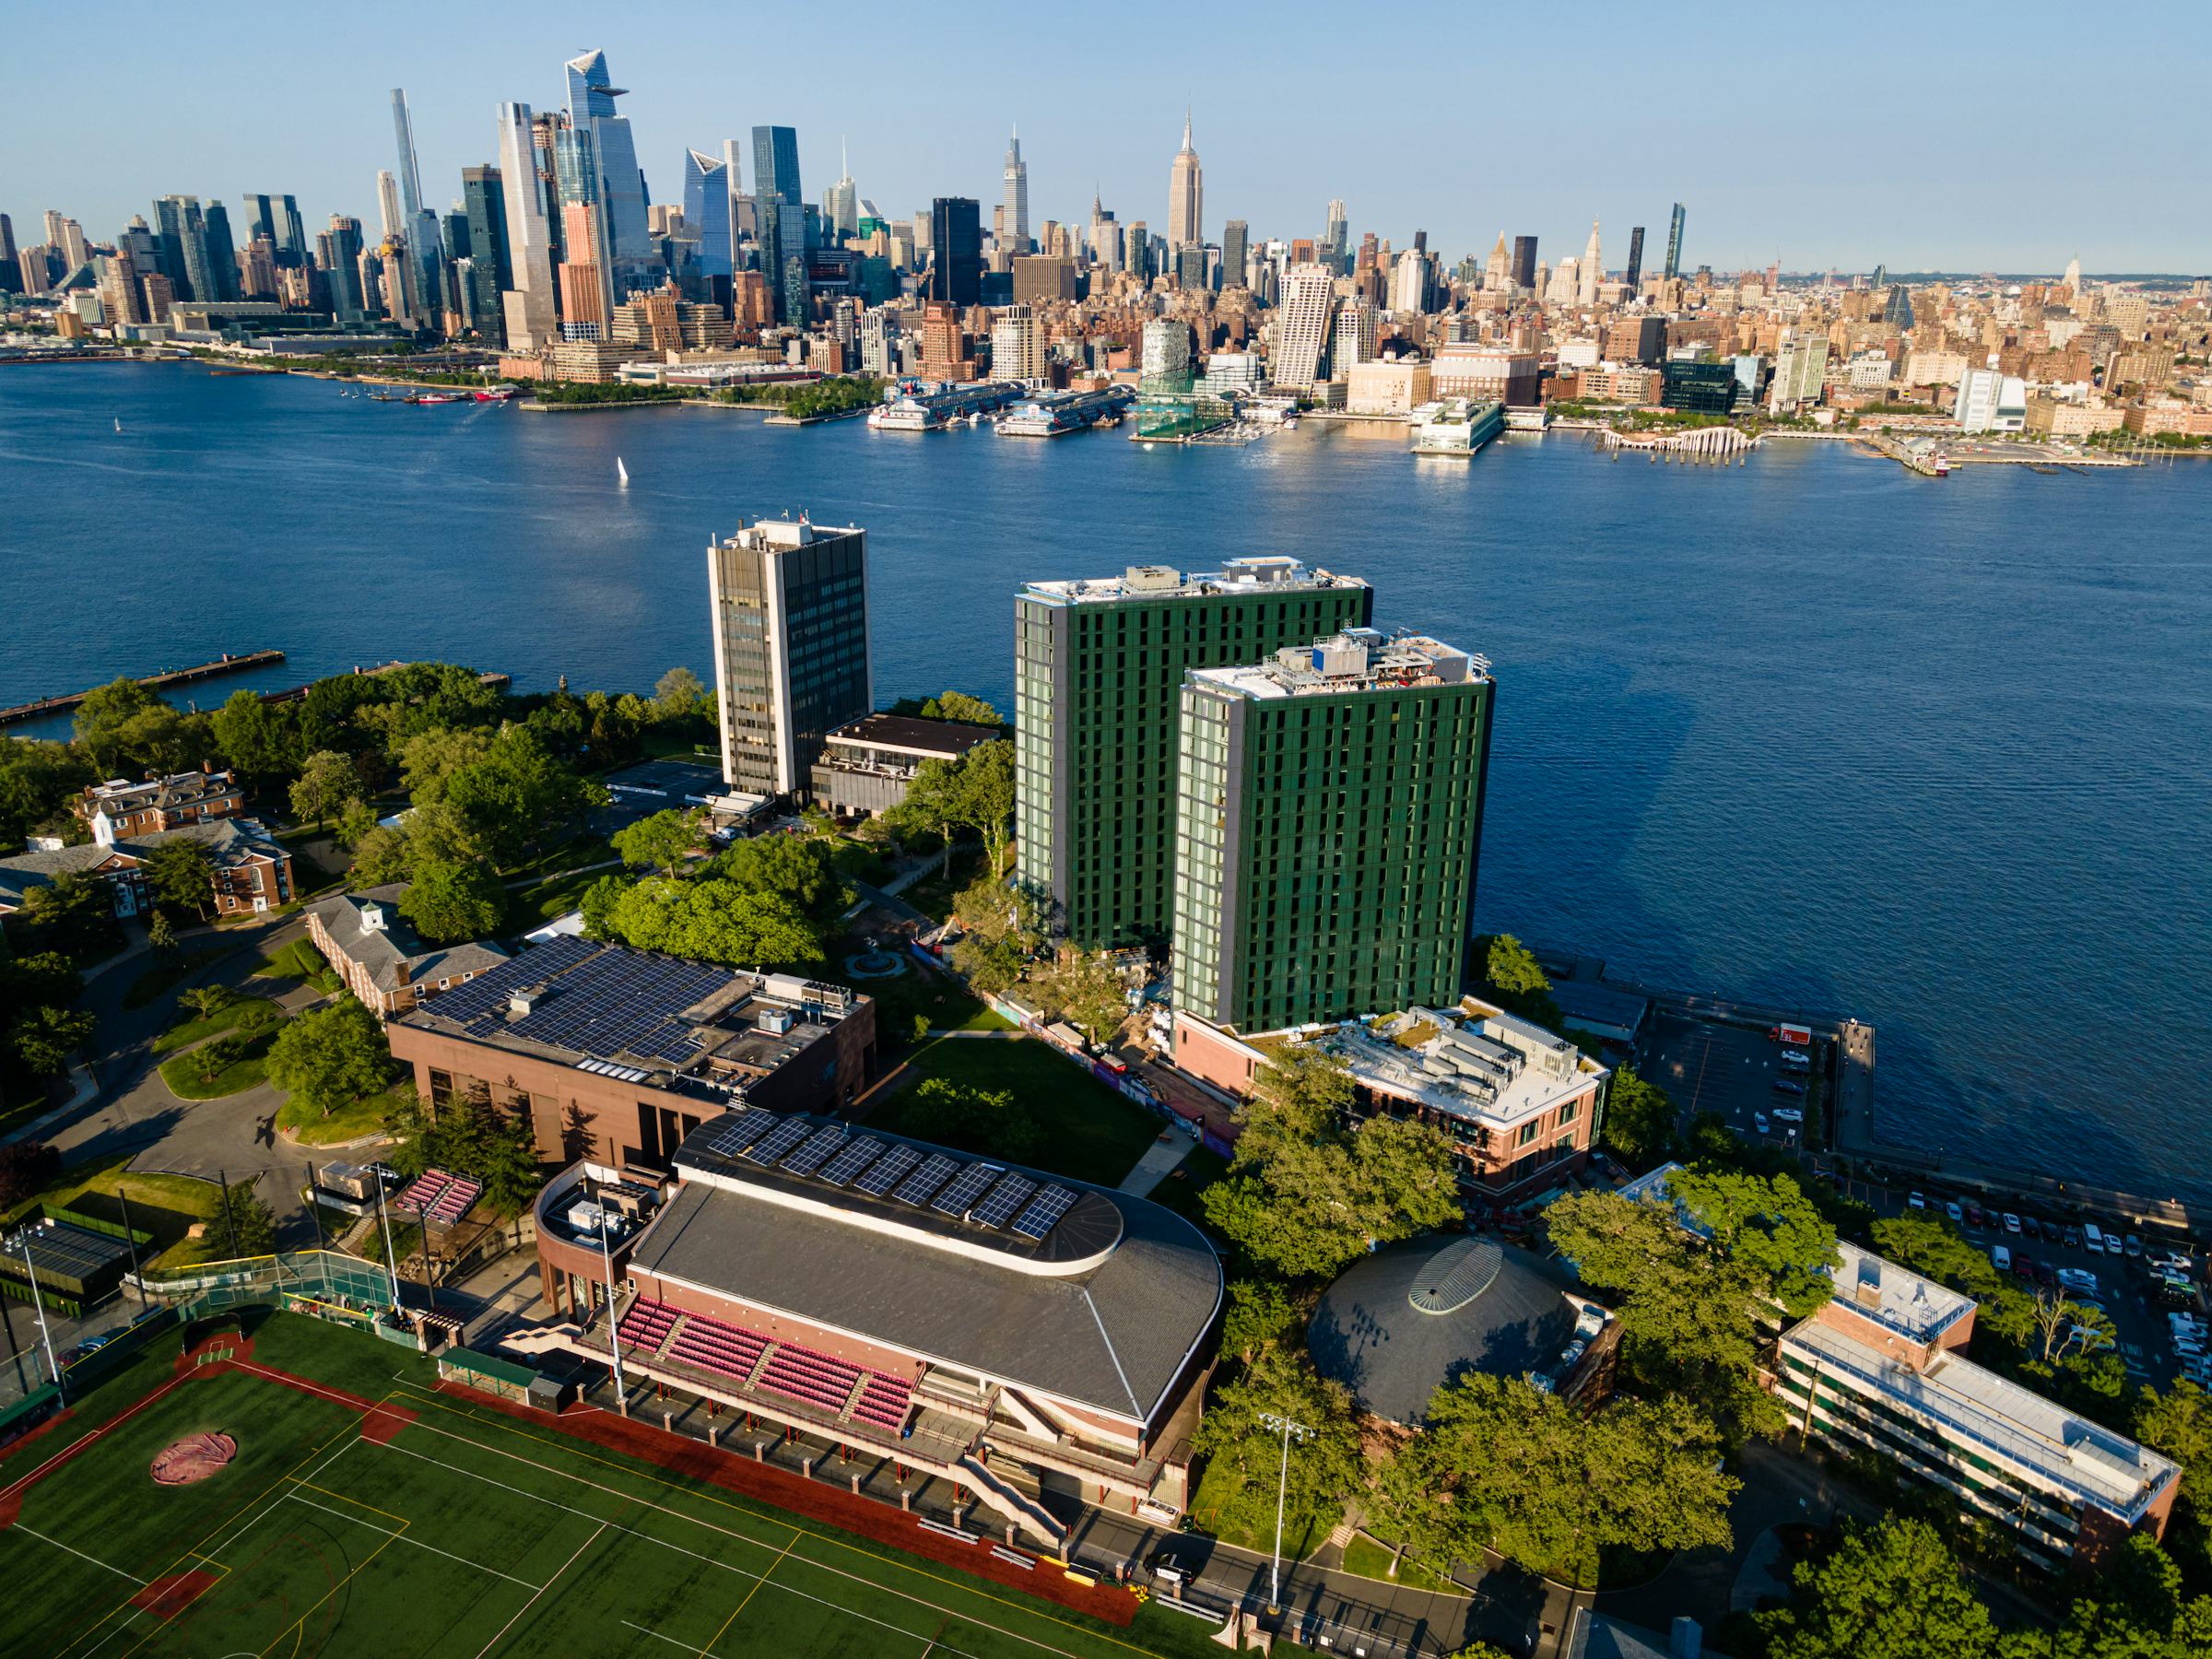 An aerial view of campus with New York City as the backdrop